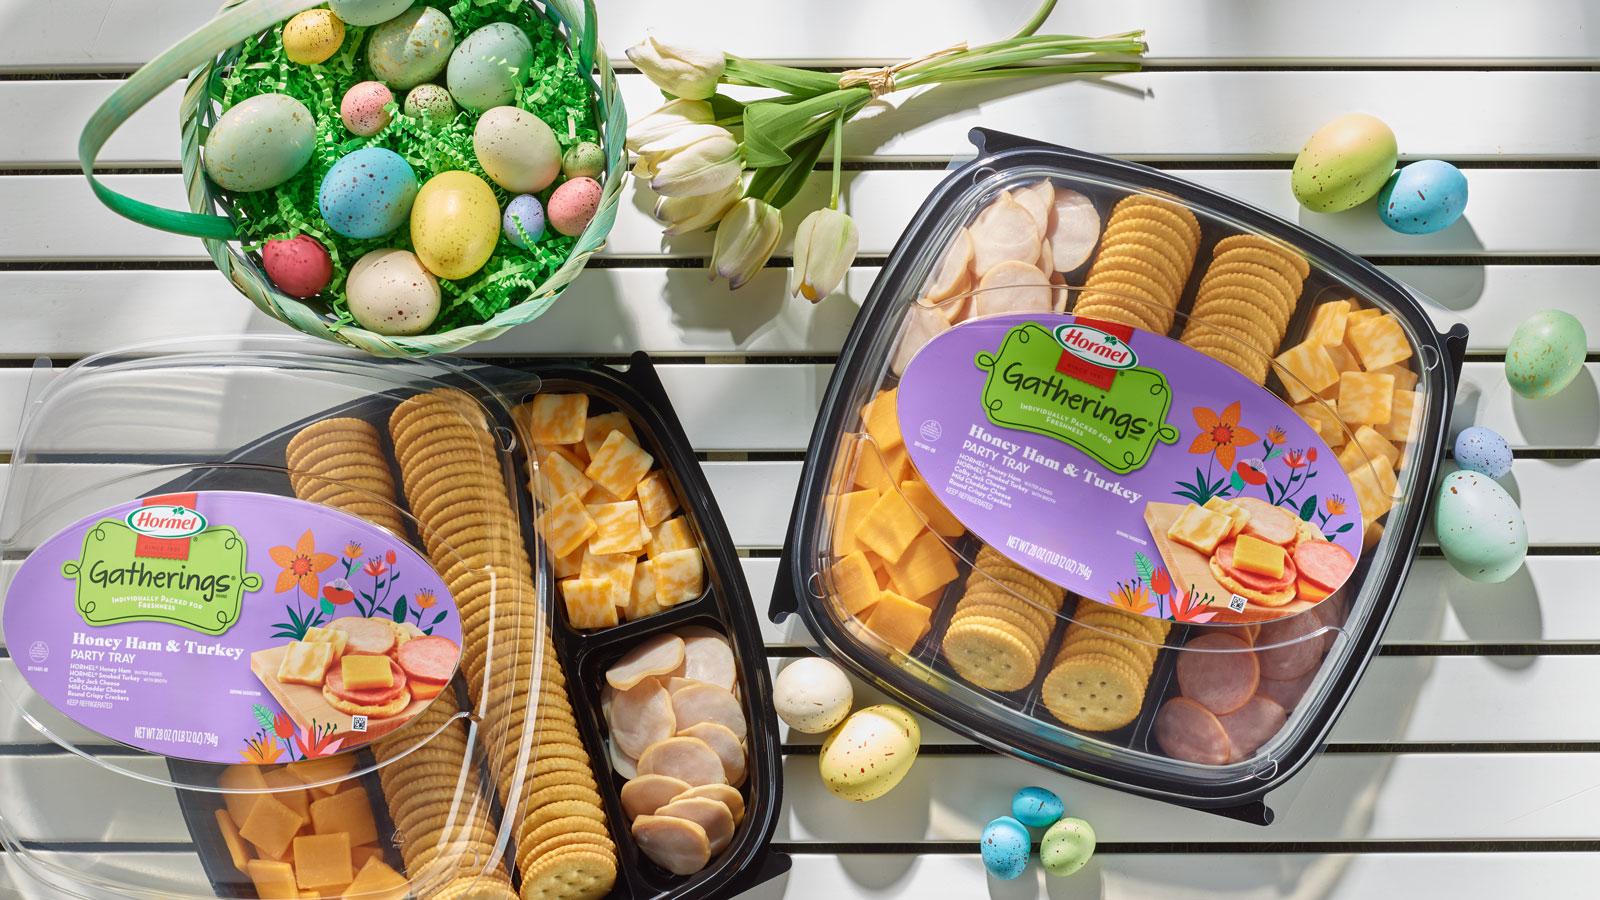 Honey Ham and Turkey party trays with flowers and easter eggs